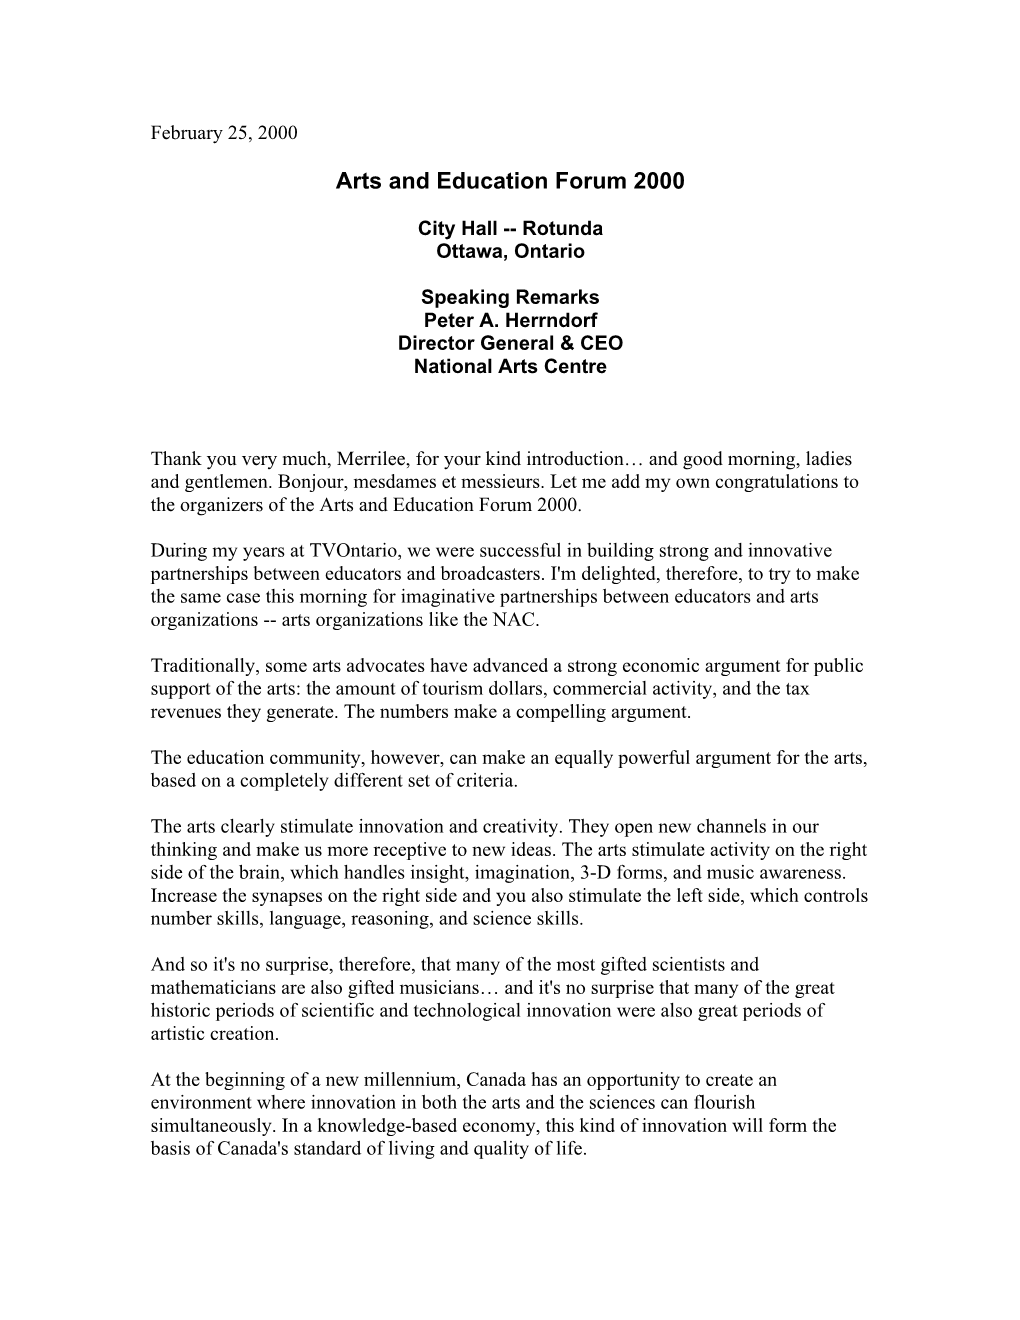 Arts and Education Forum 2000